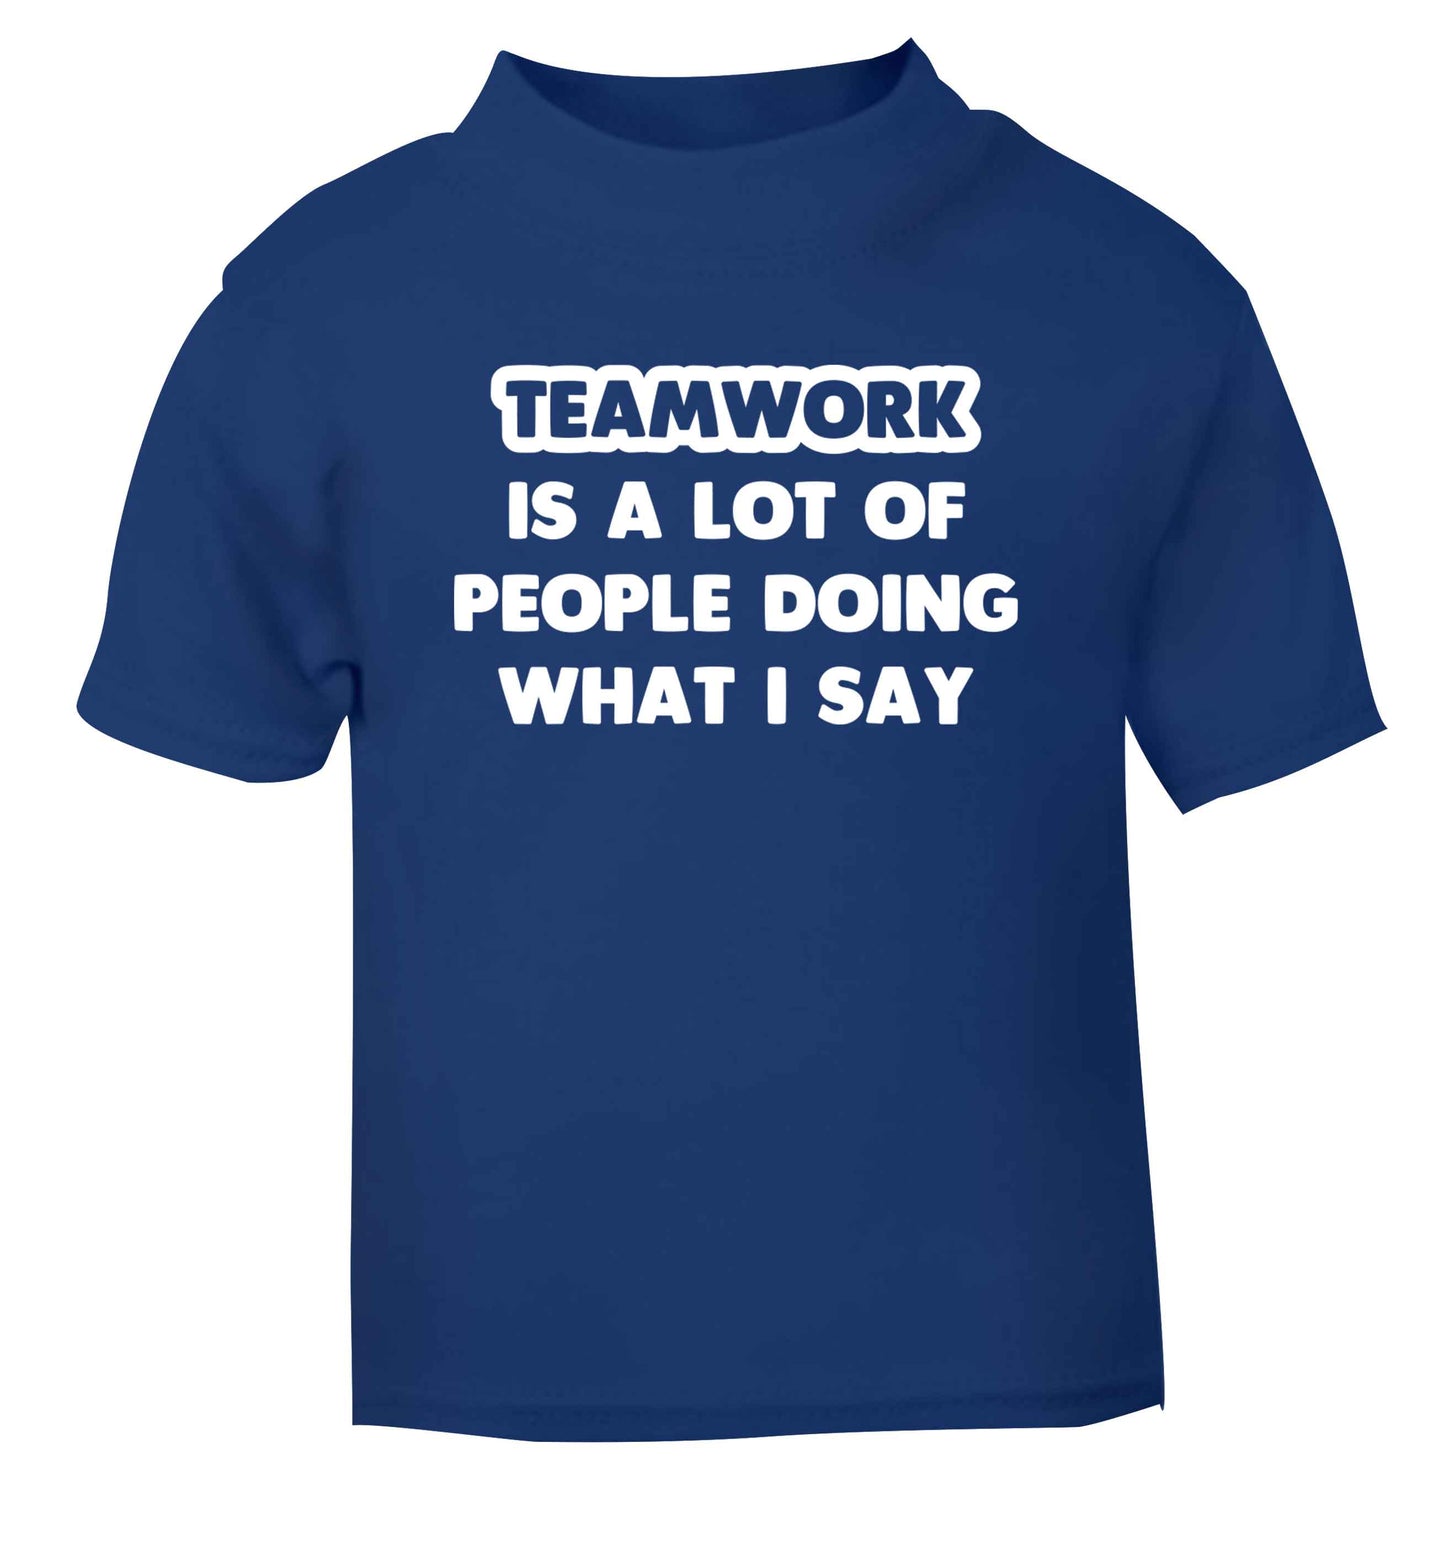 Teamwork is a lot of people doing what I say blue Baby Toddler Tshirt 2 Years